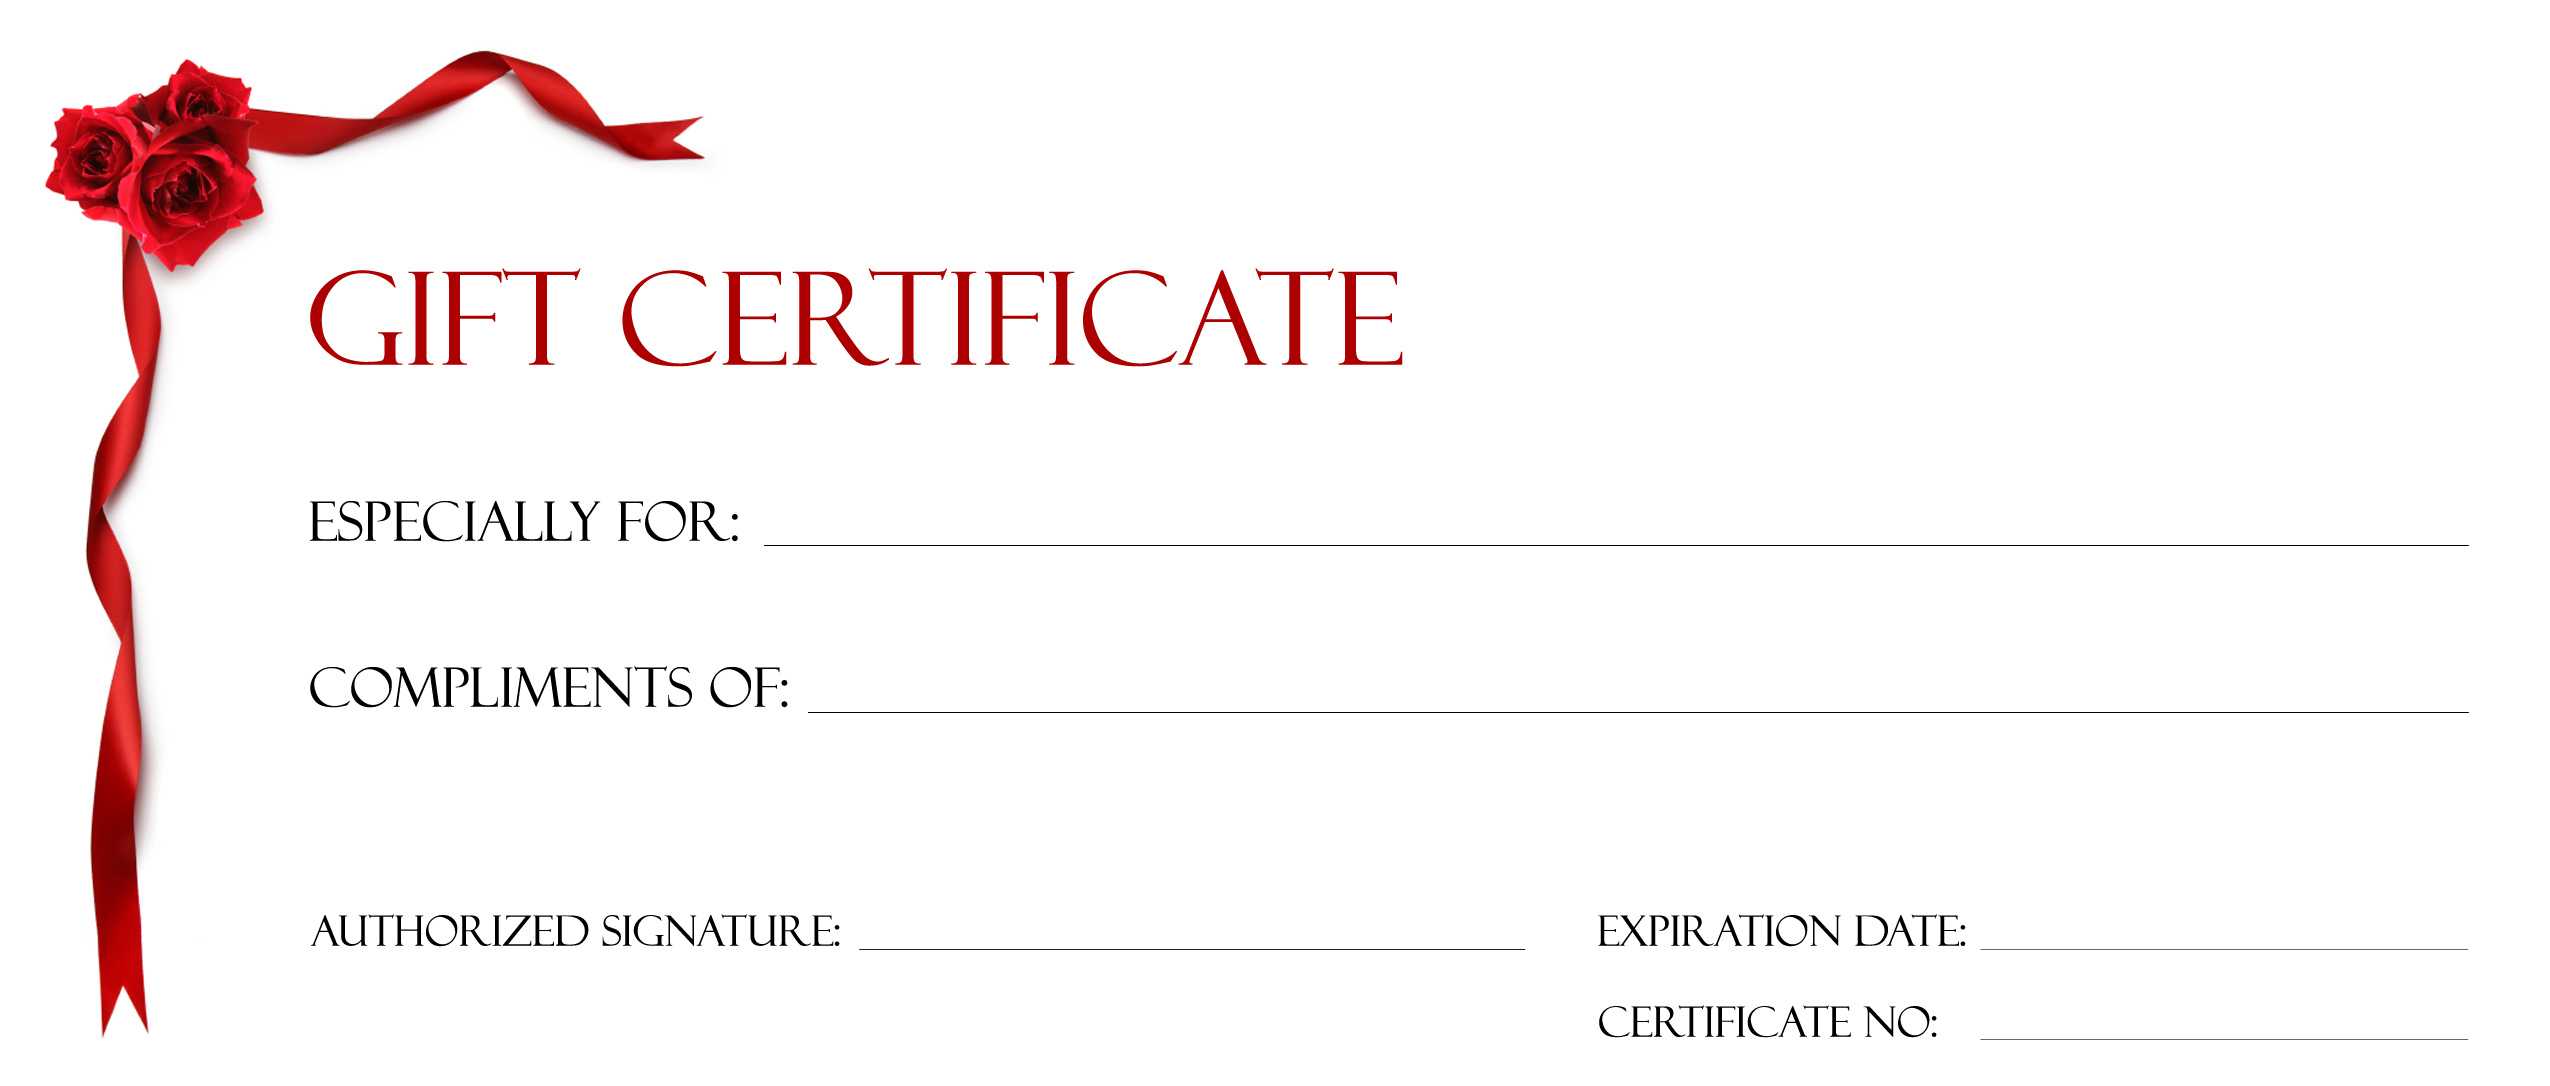 Gift Certificate Template Microsoft Publisher With Gift Certificate Template Publisher